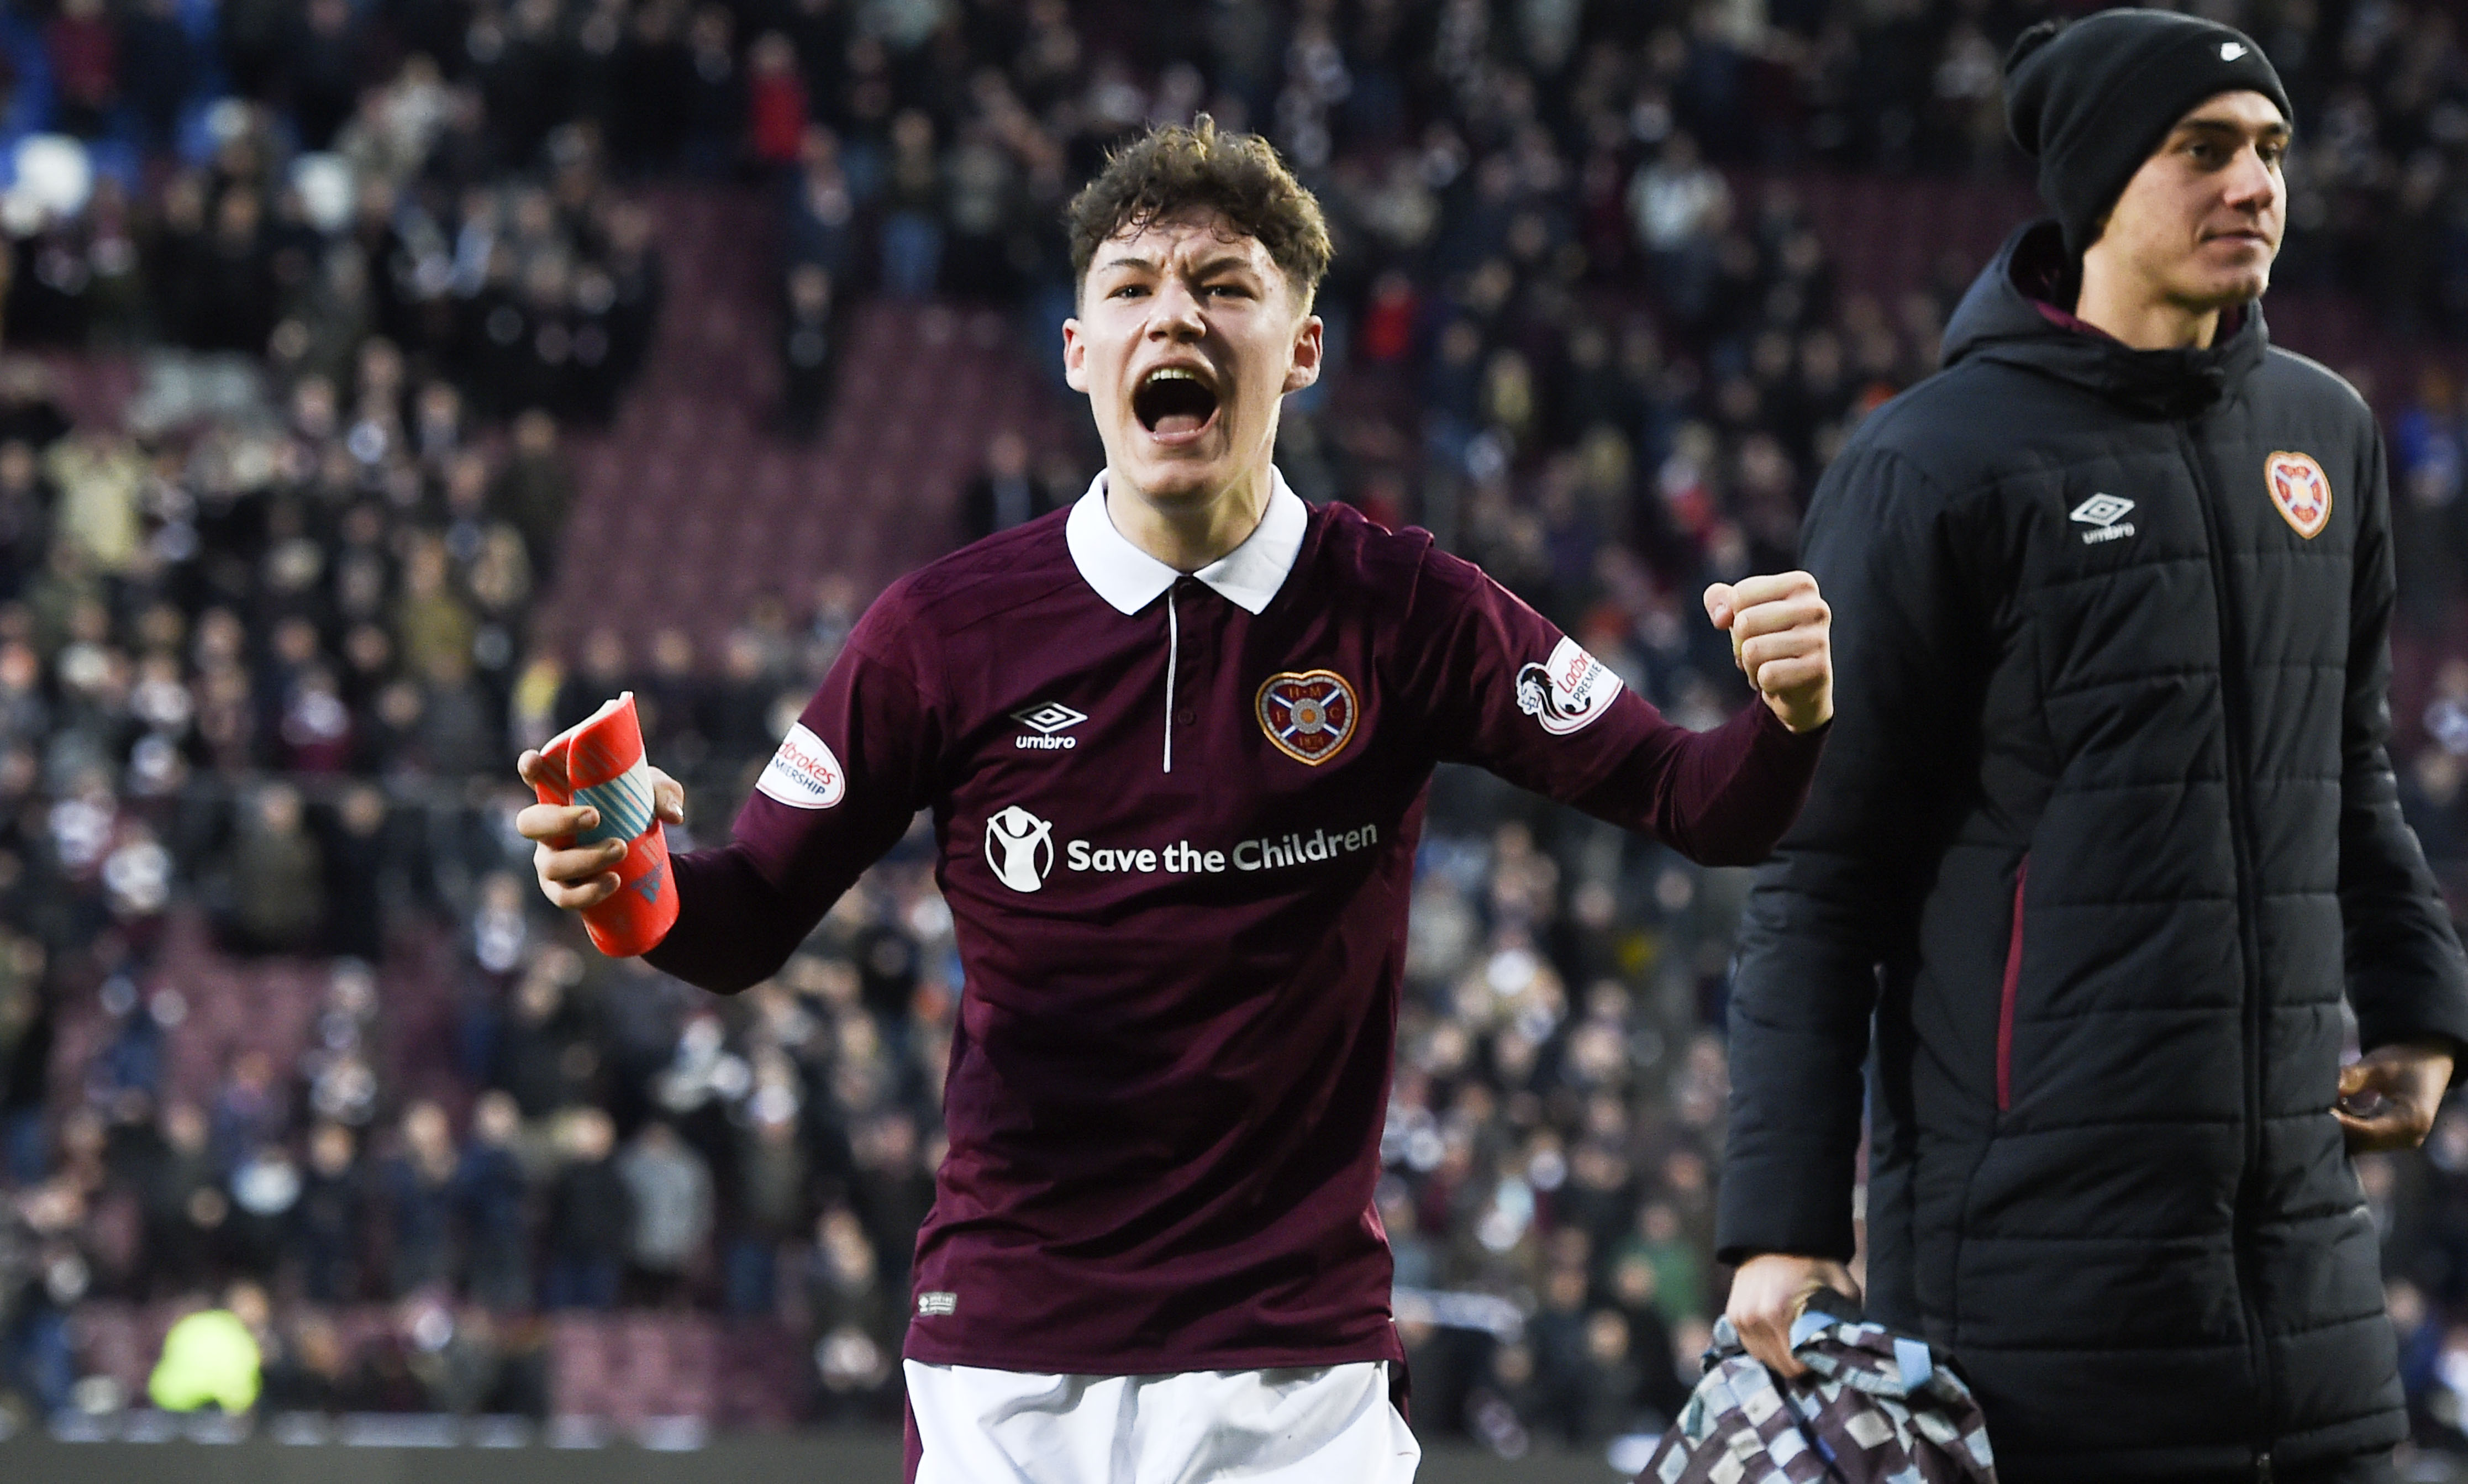 McDonald will miss out on the semi-final with parent club Hearts.